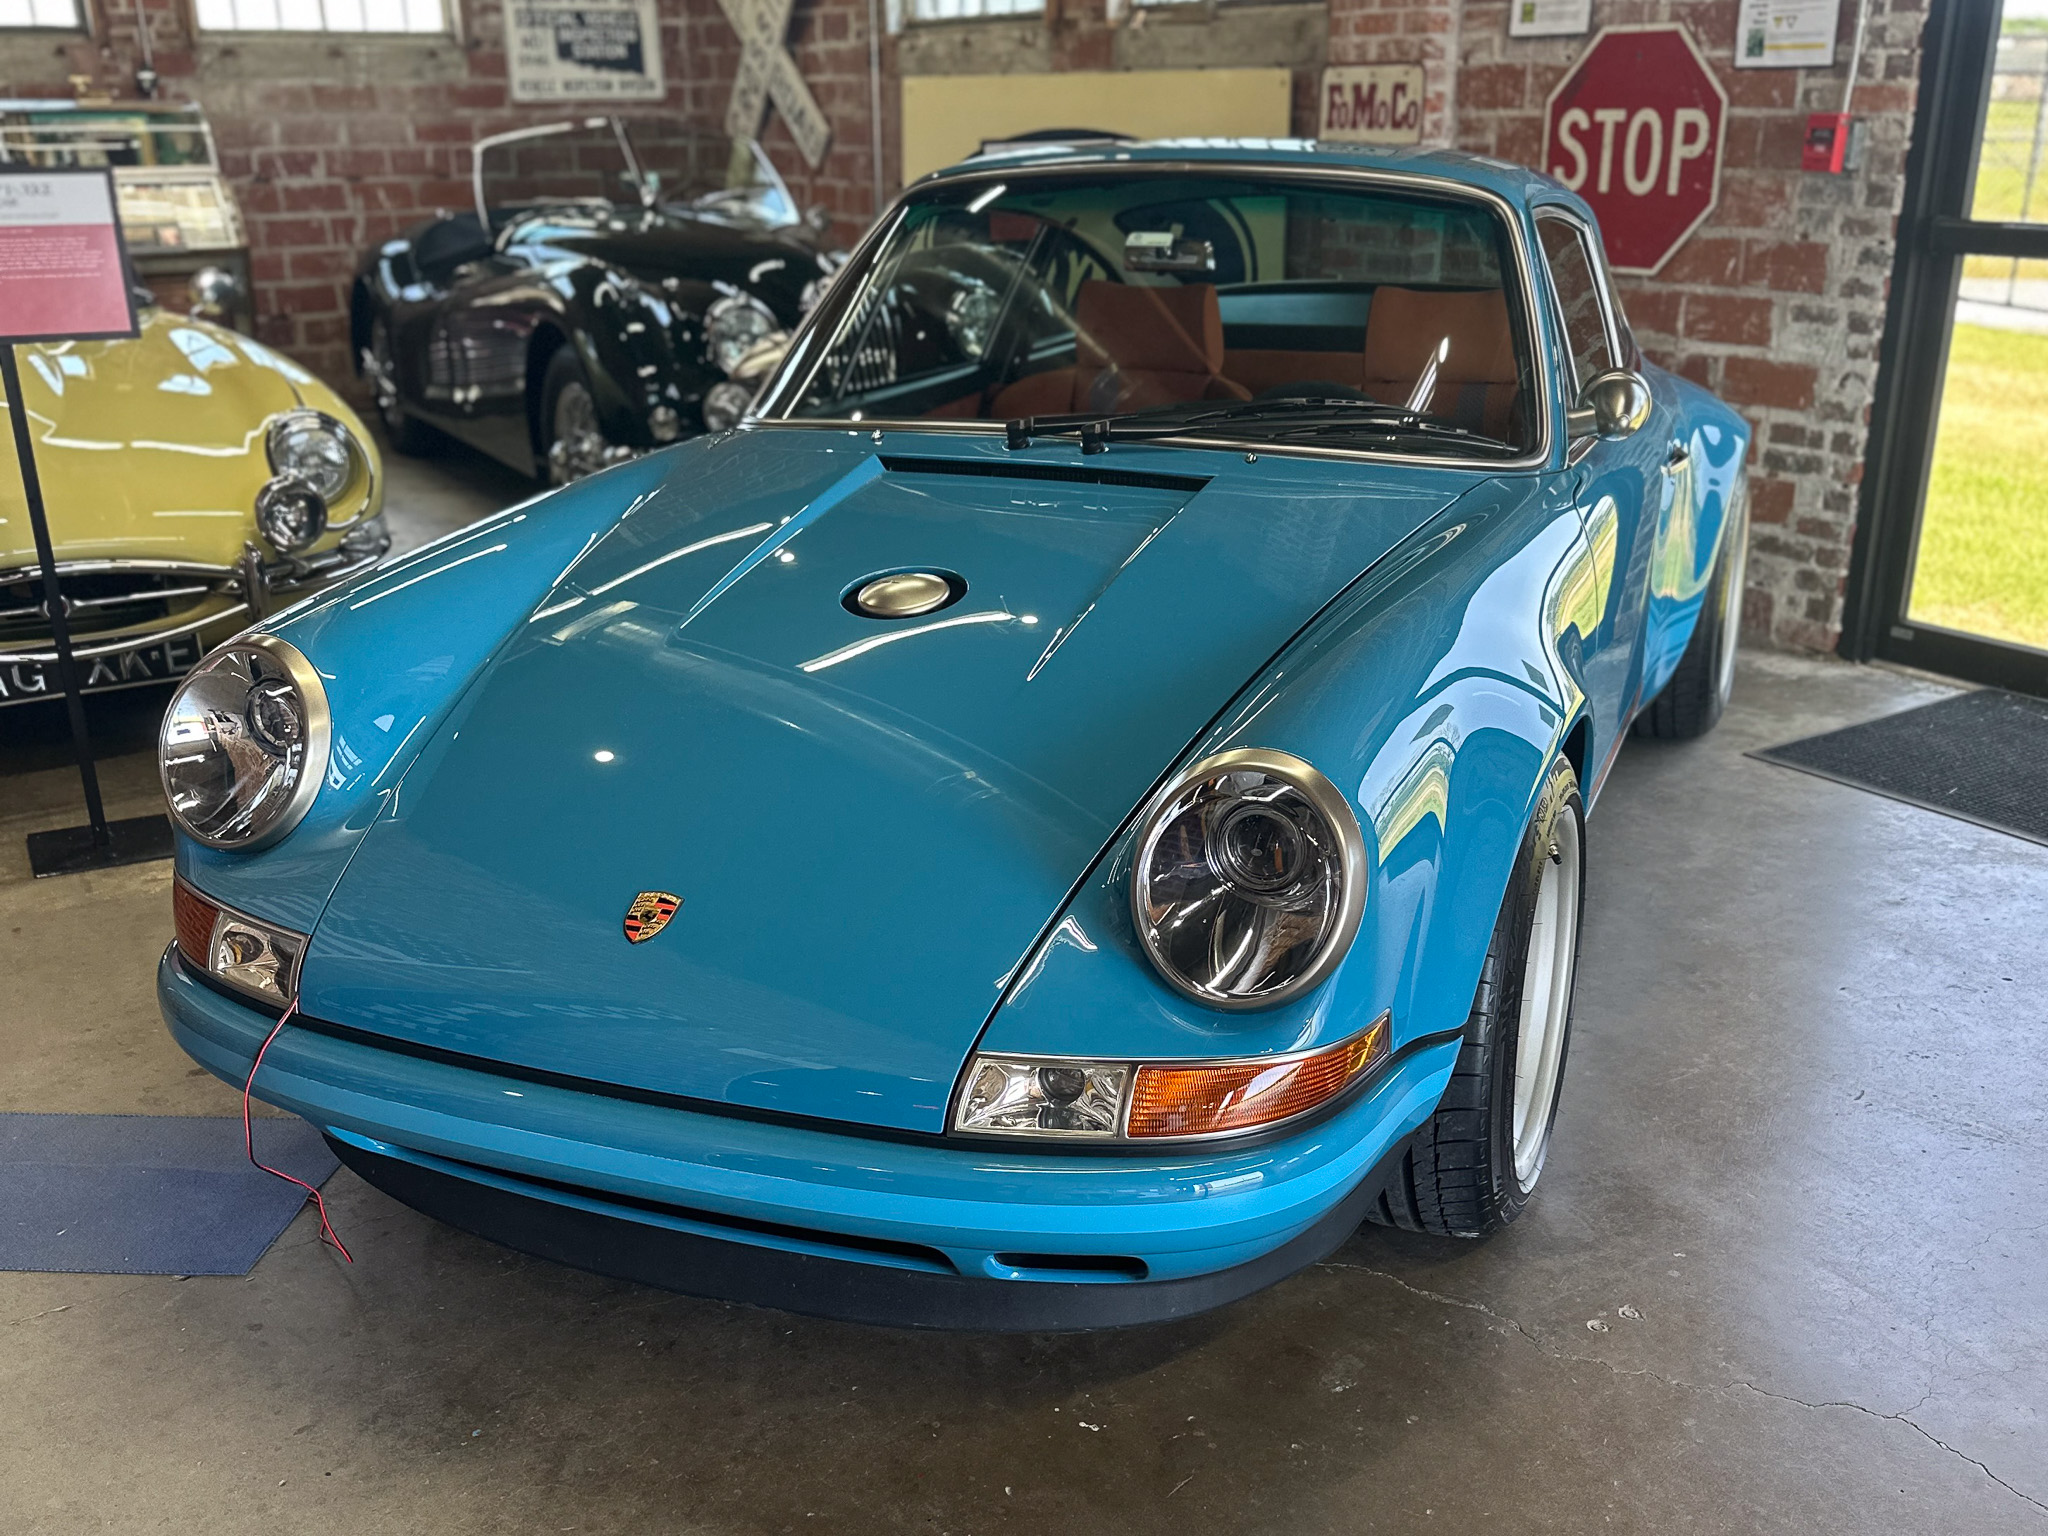 1989 Porsche 911 Singer - Previously on display at the Heart of Route 66 Auto Museum om Sapulpa, OK